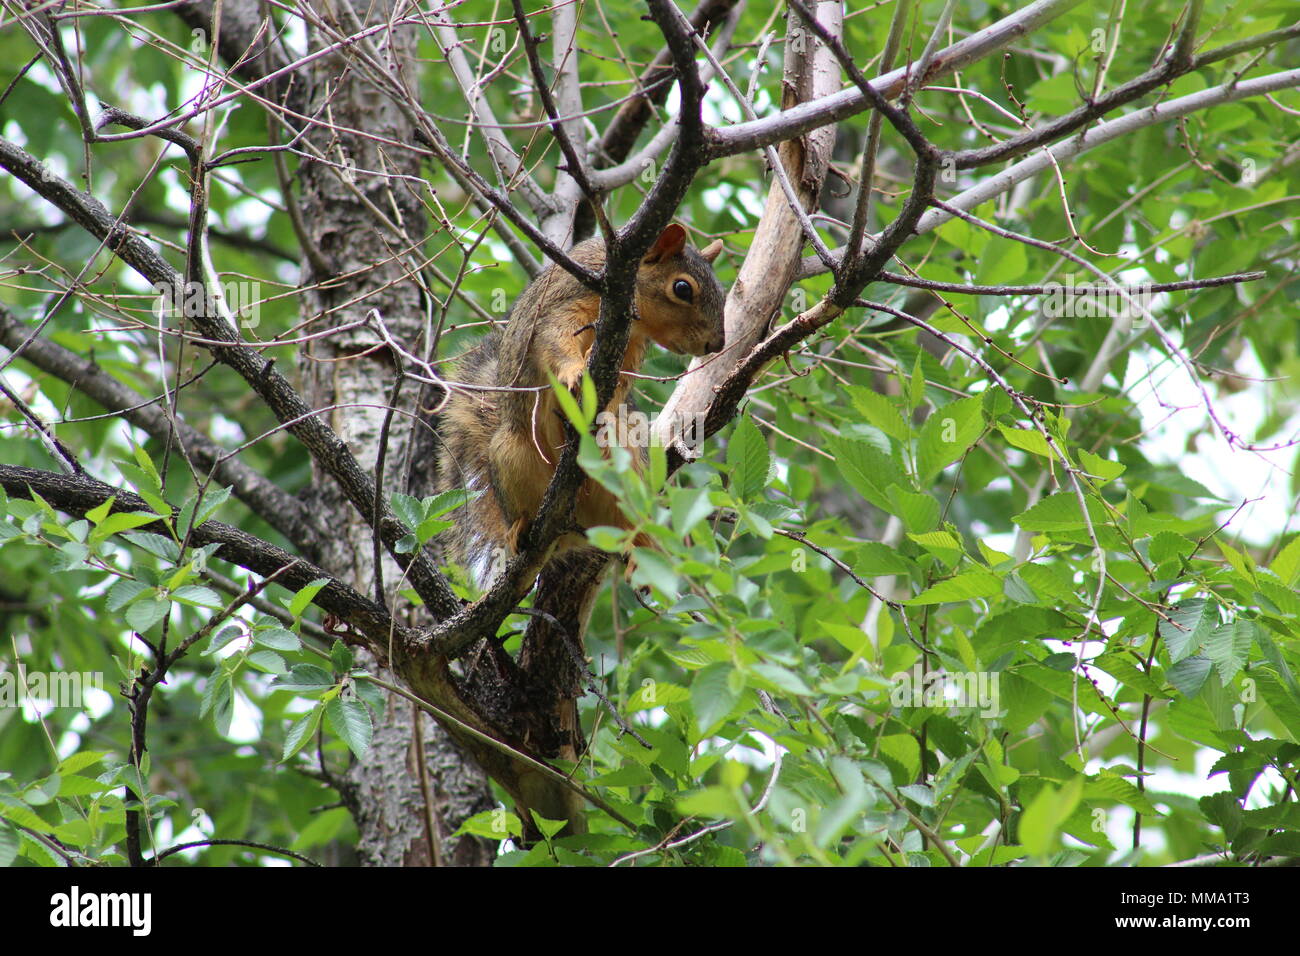 Chattering Squirrel Watching a Cat from The Safety of  a Tree Stock Photo